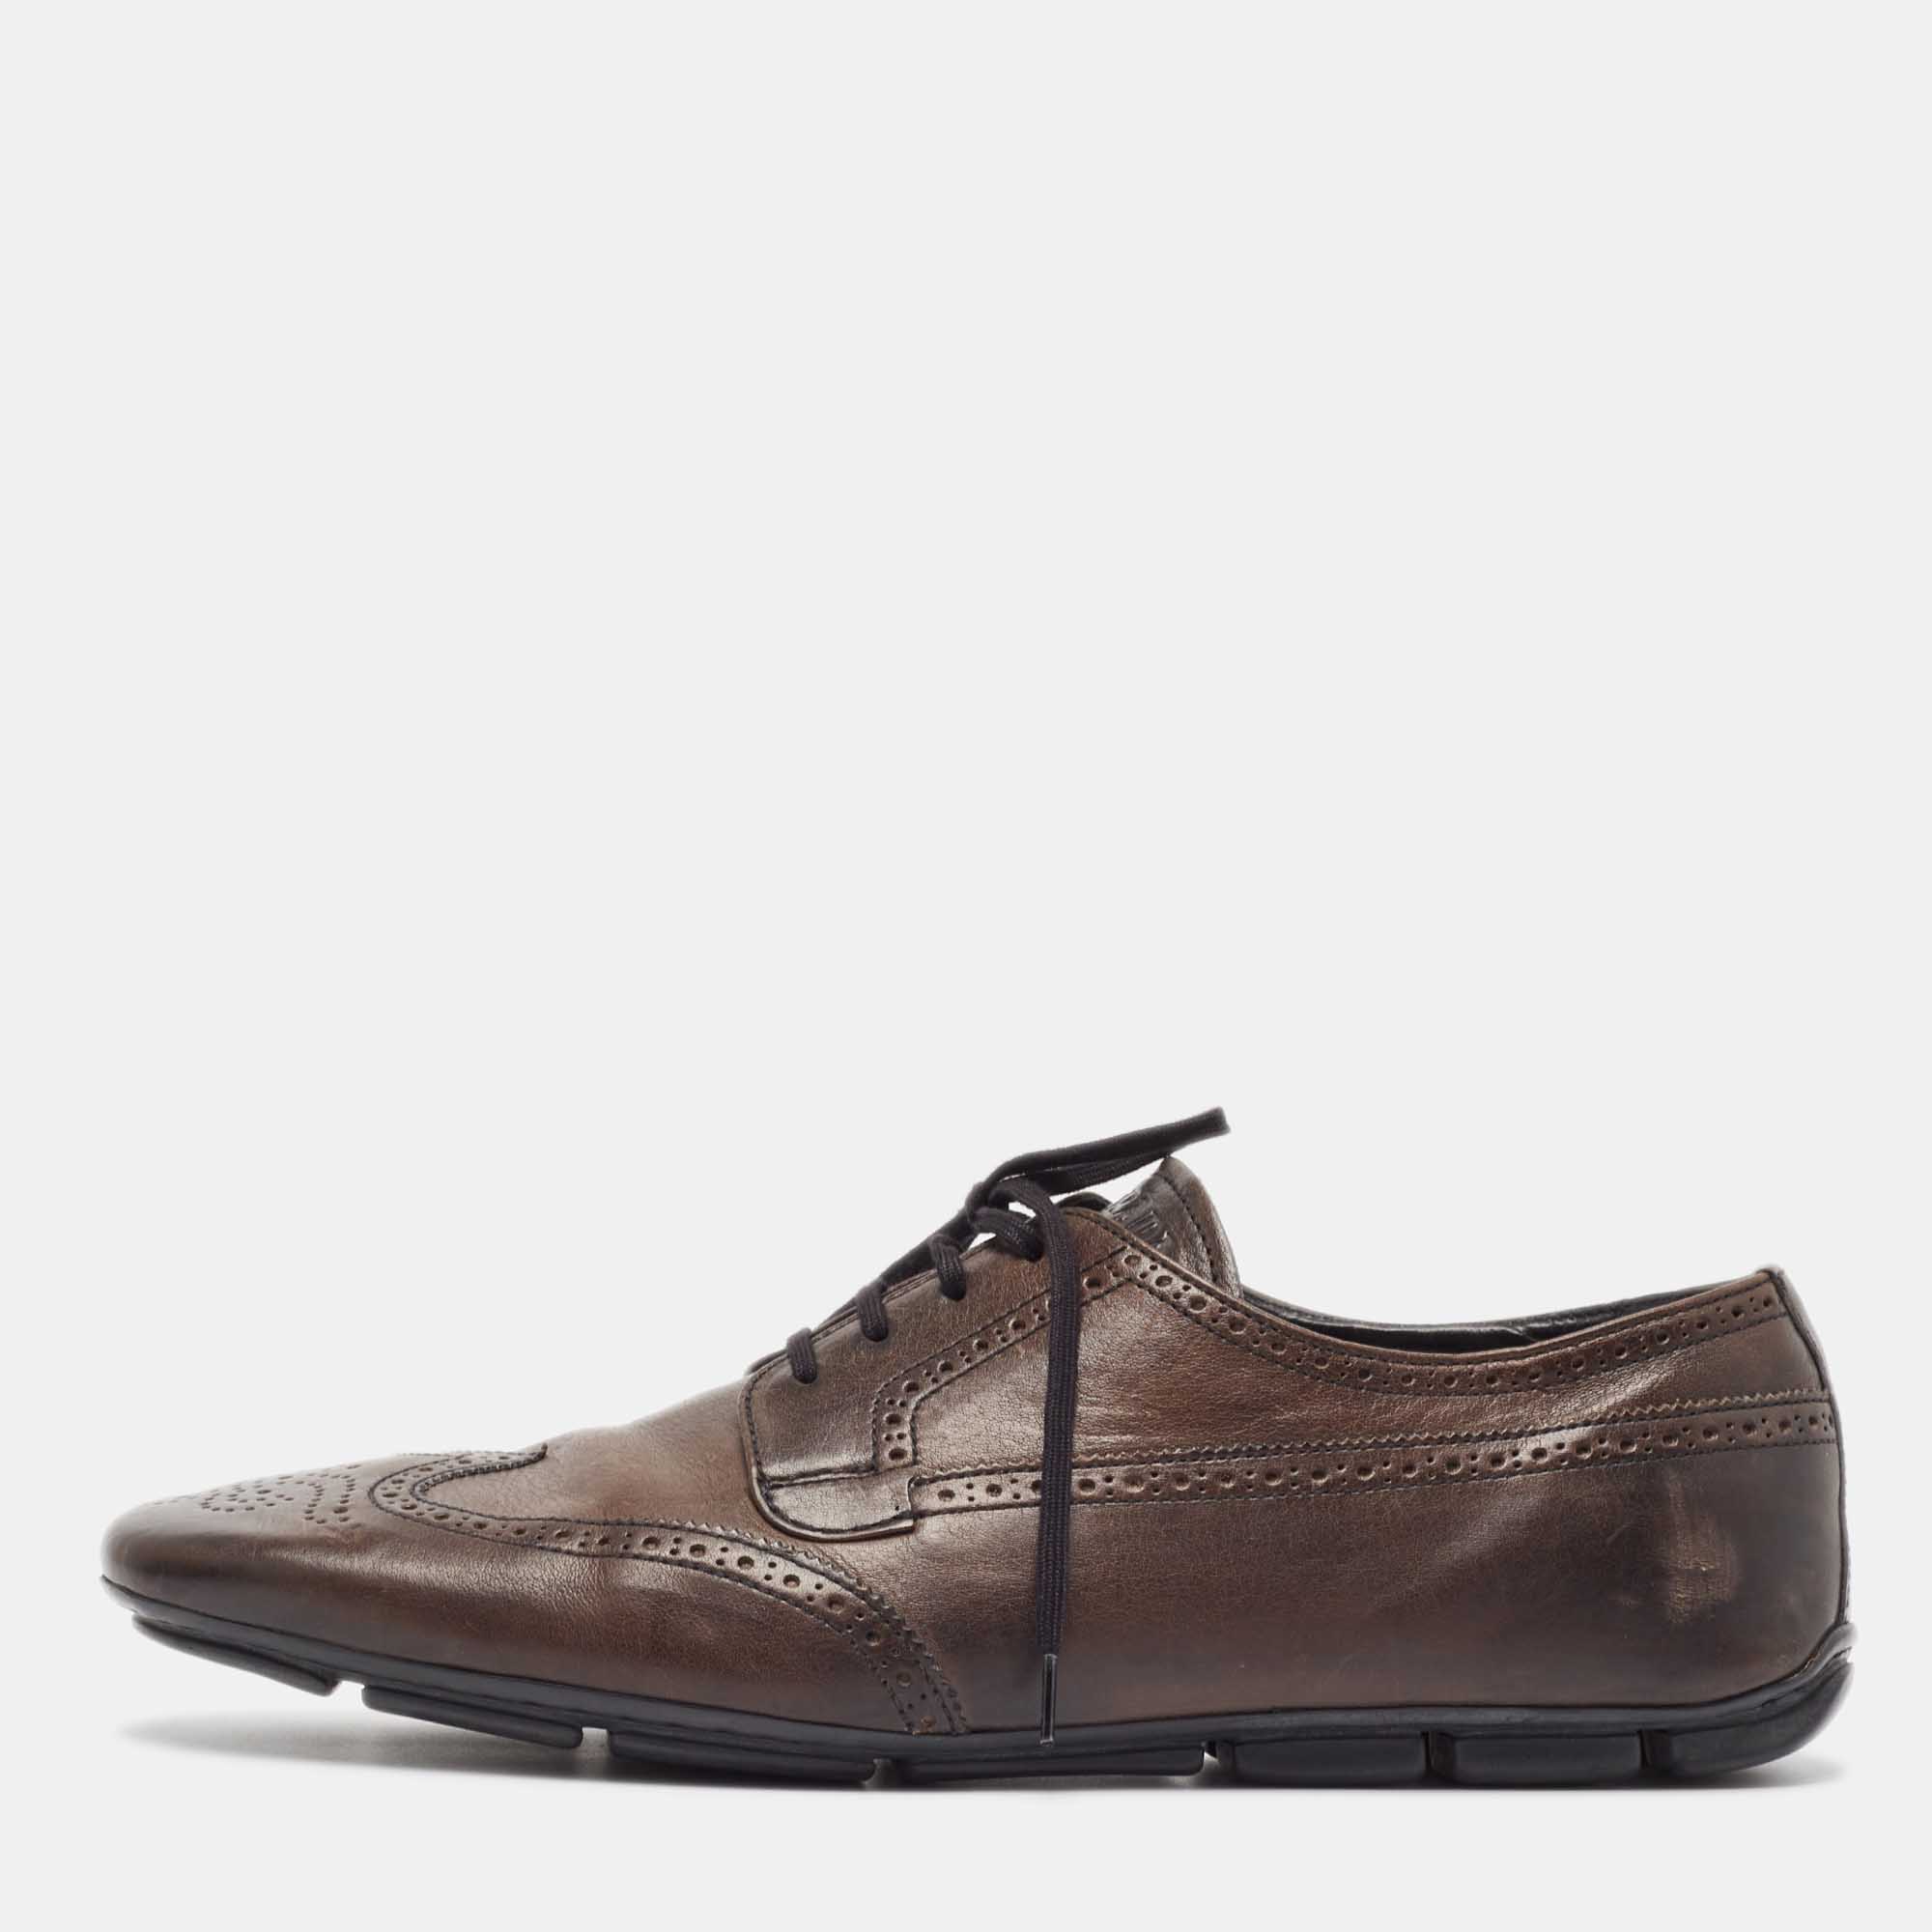 

Prada Brown Brogue Leather Lace Up Oxfords Size 44